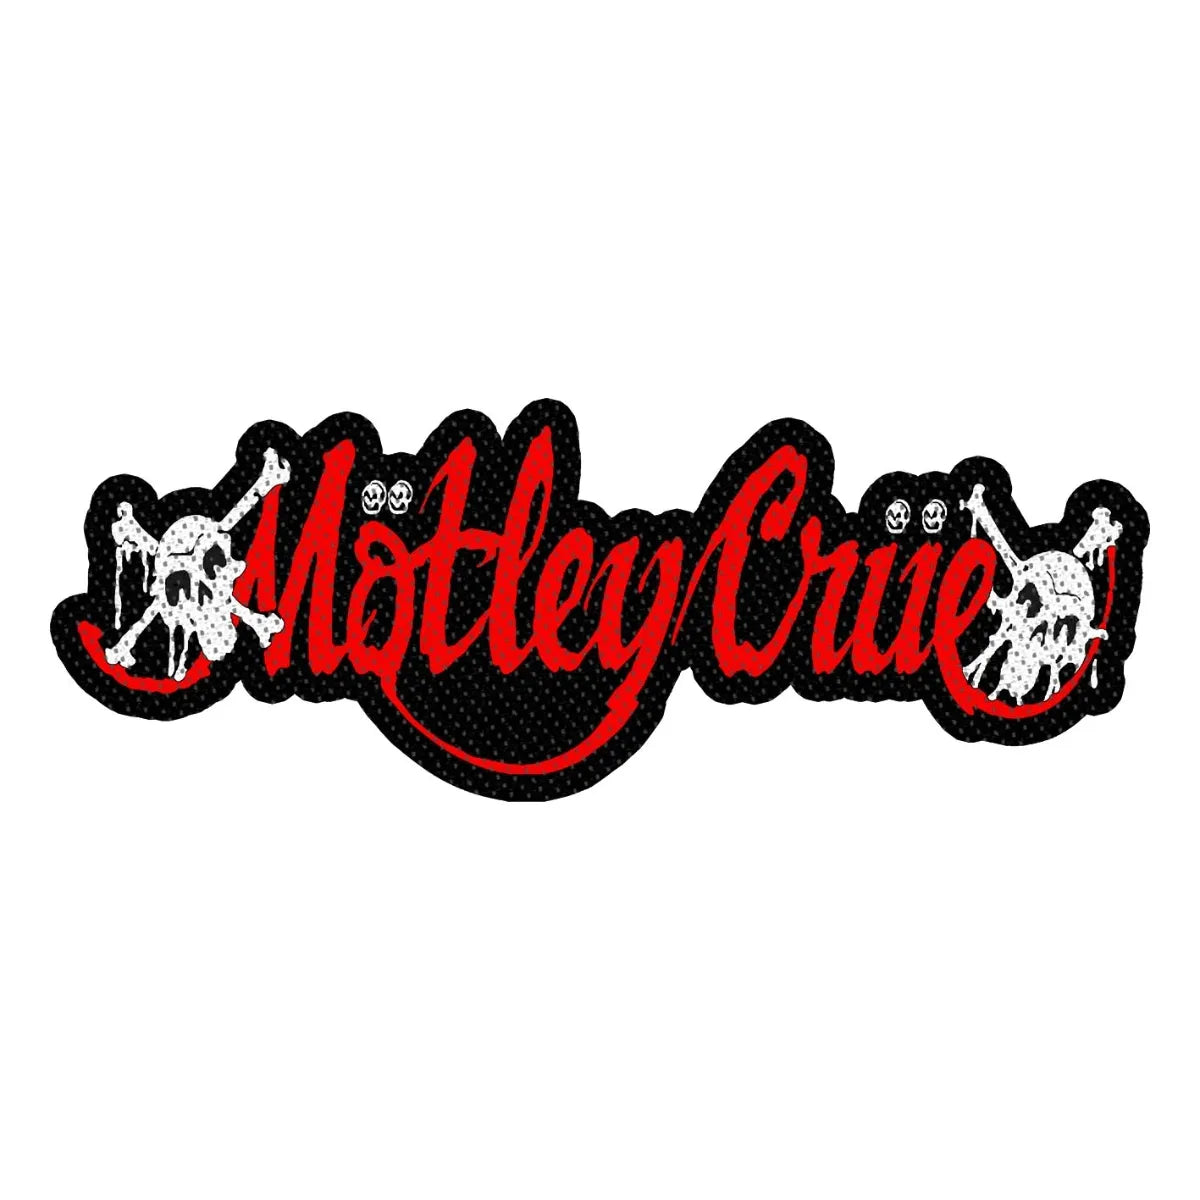 Motley Crue - Dr Feelgood Cut-Out (100mm x 40mm) Sew-On Patch